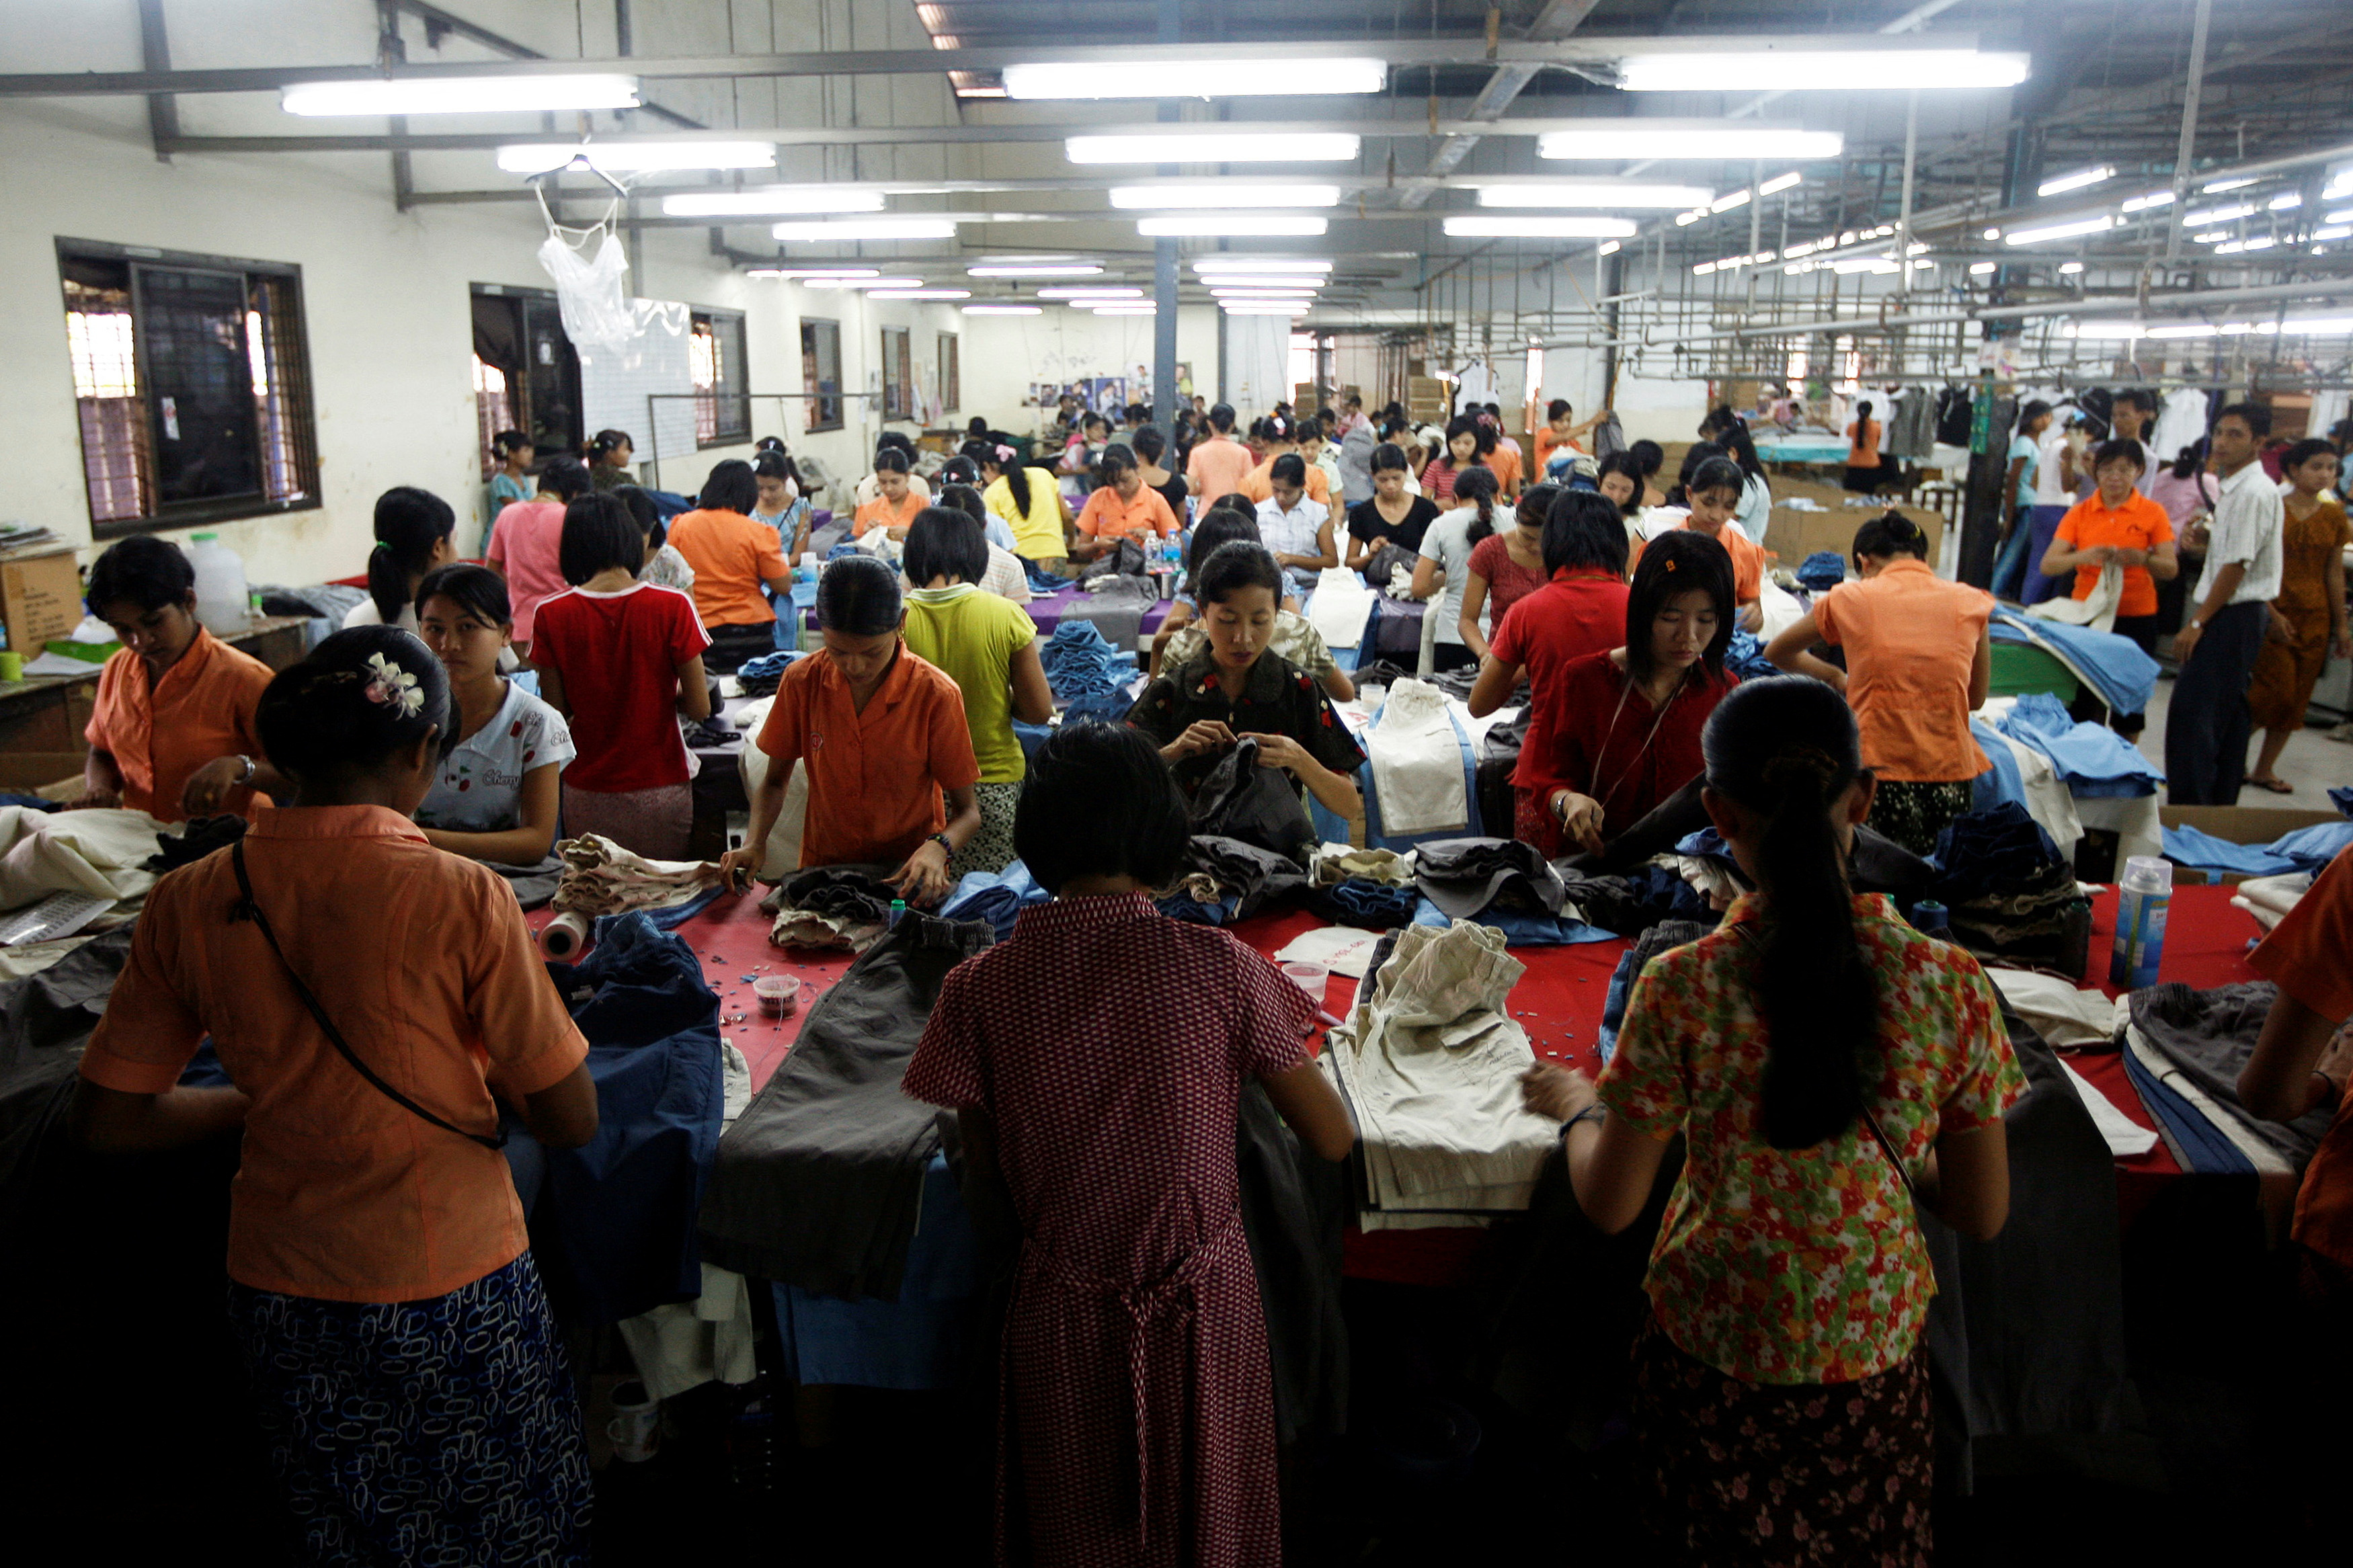 Workers tailor and arrange clothing at a garment factory at Hlaing Tar Yar industry zone in Yangon